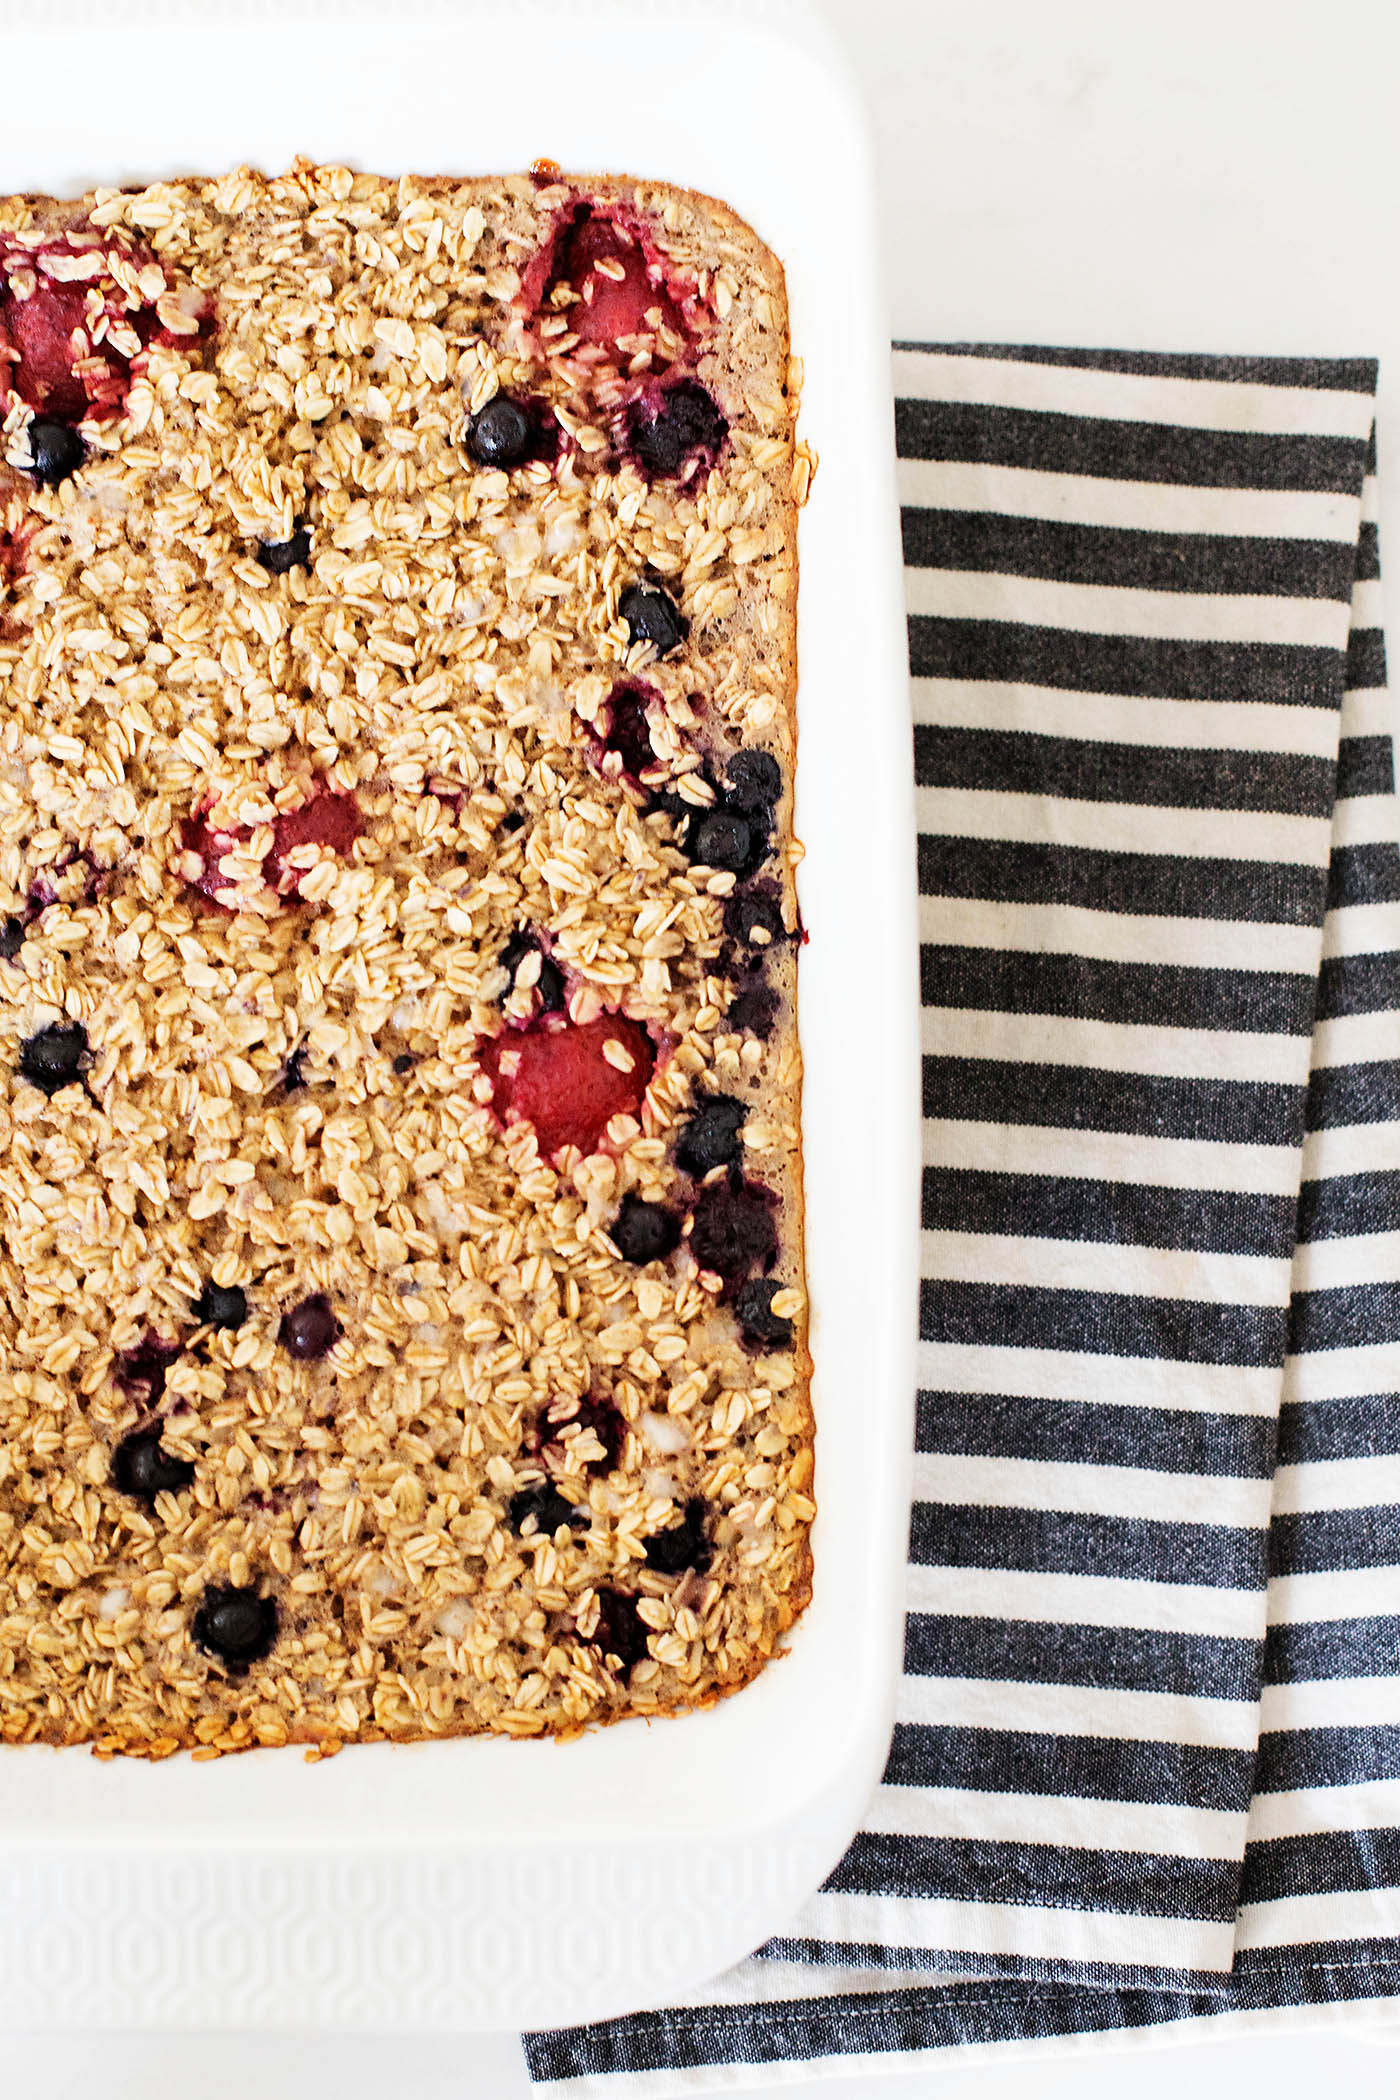 Easy Baked Berry Oatmeal with cottage cheese! Made gluten free just by using gluten free oats!